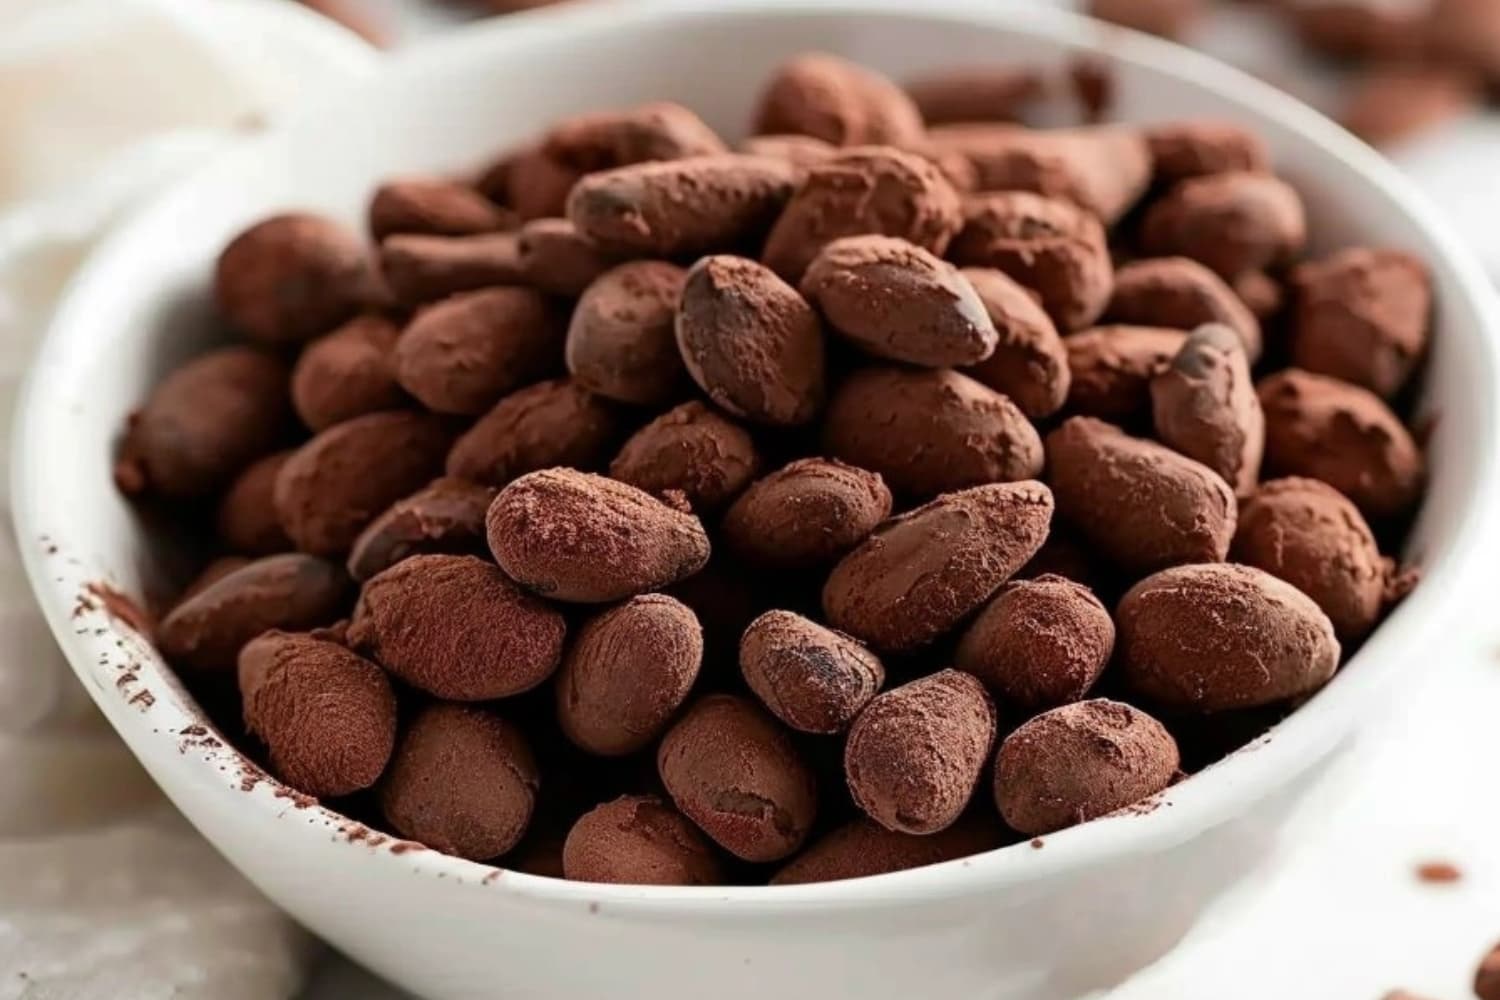 Bowl of chocolate covered almonds rolled in cocoa powder.